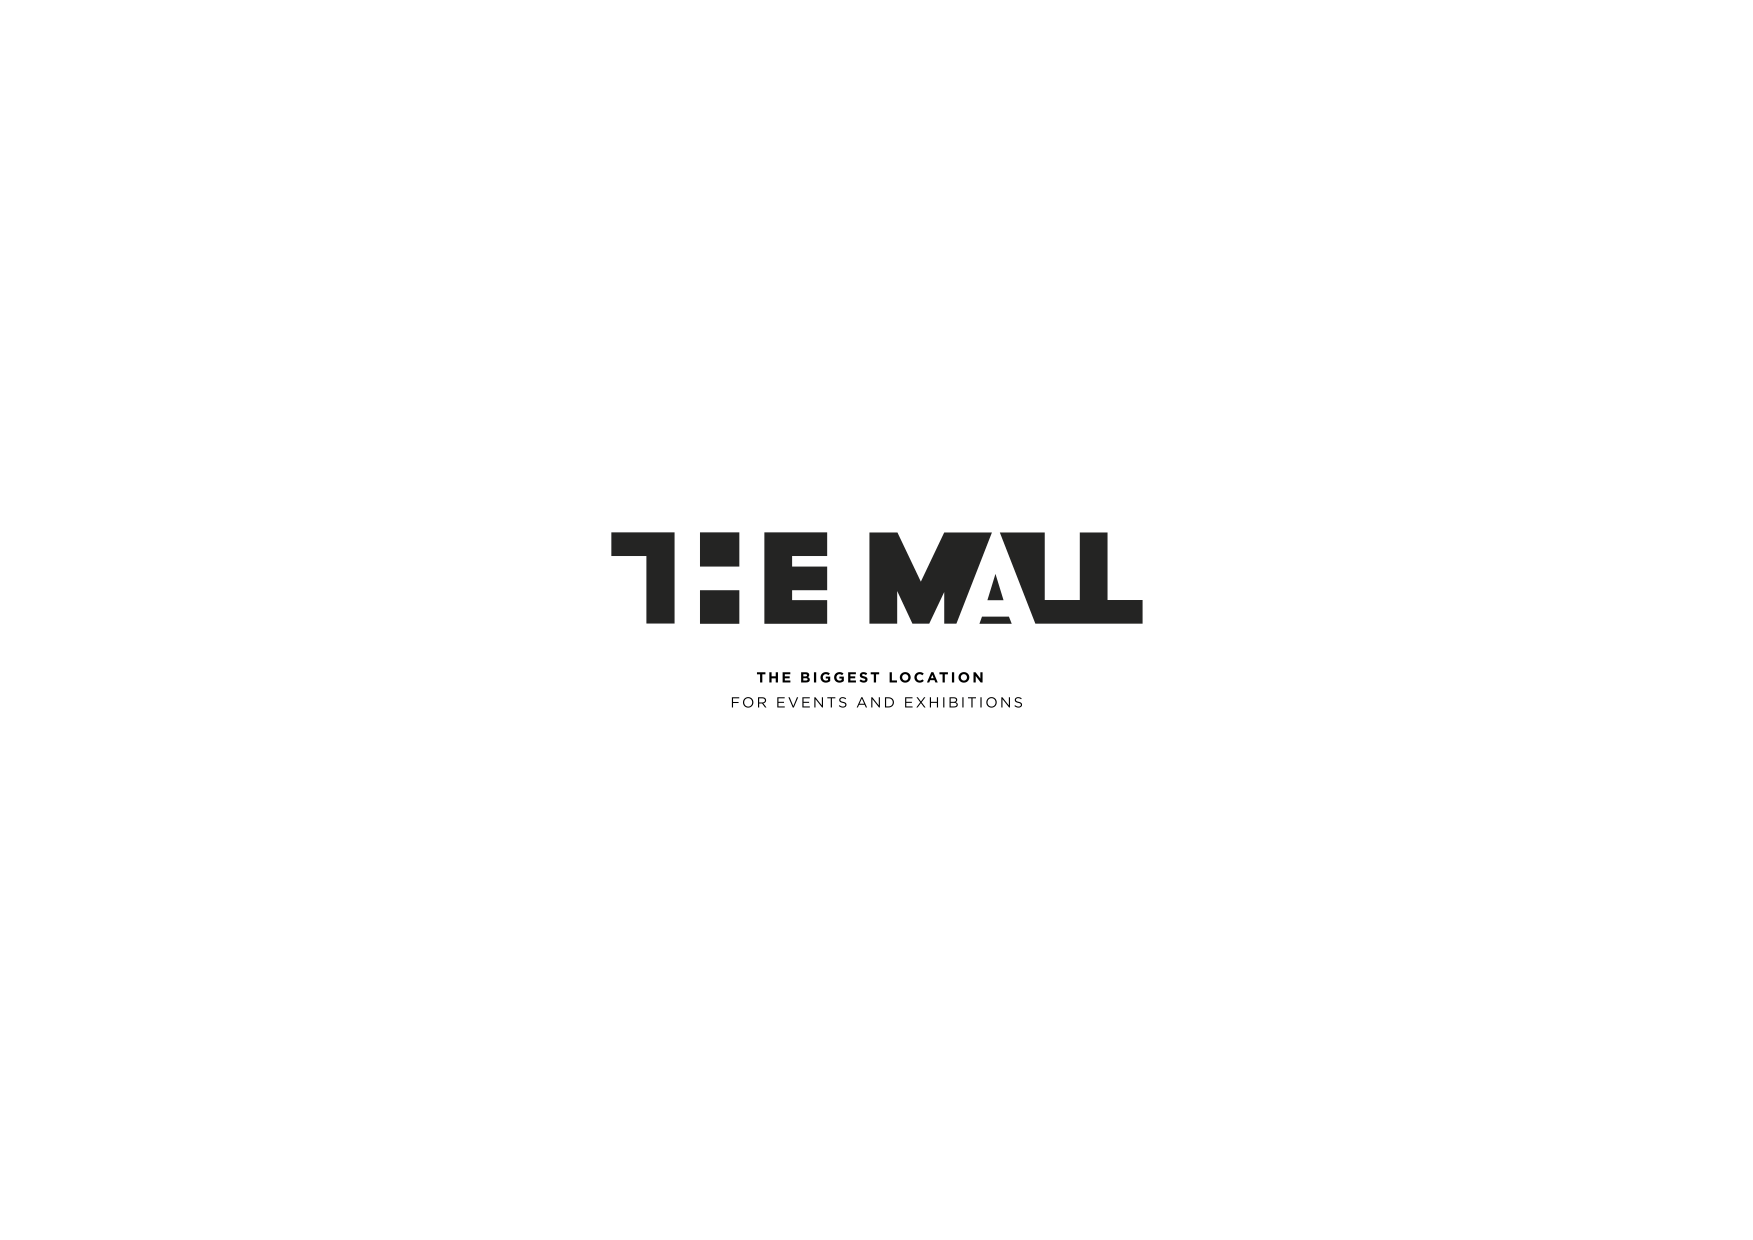 THE MALL